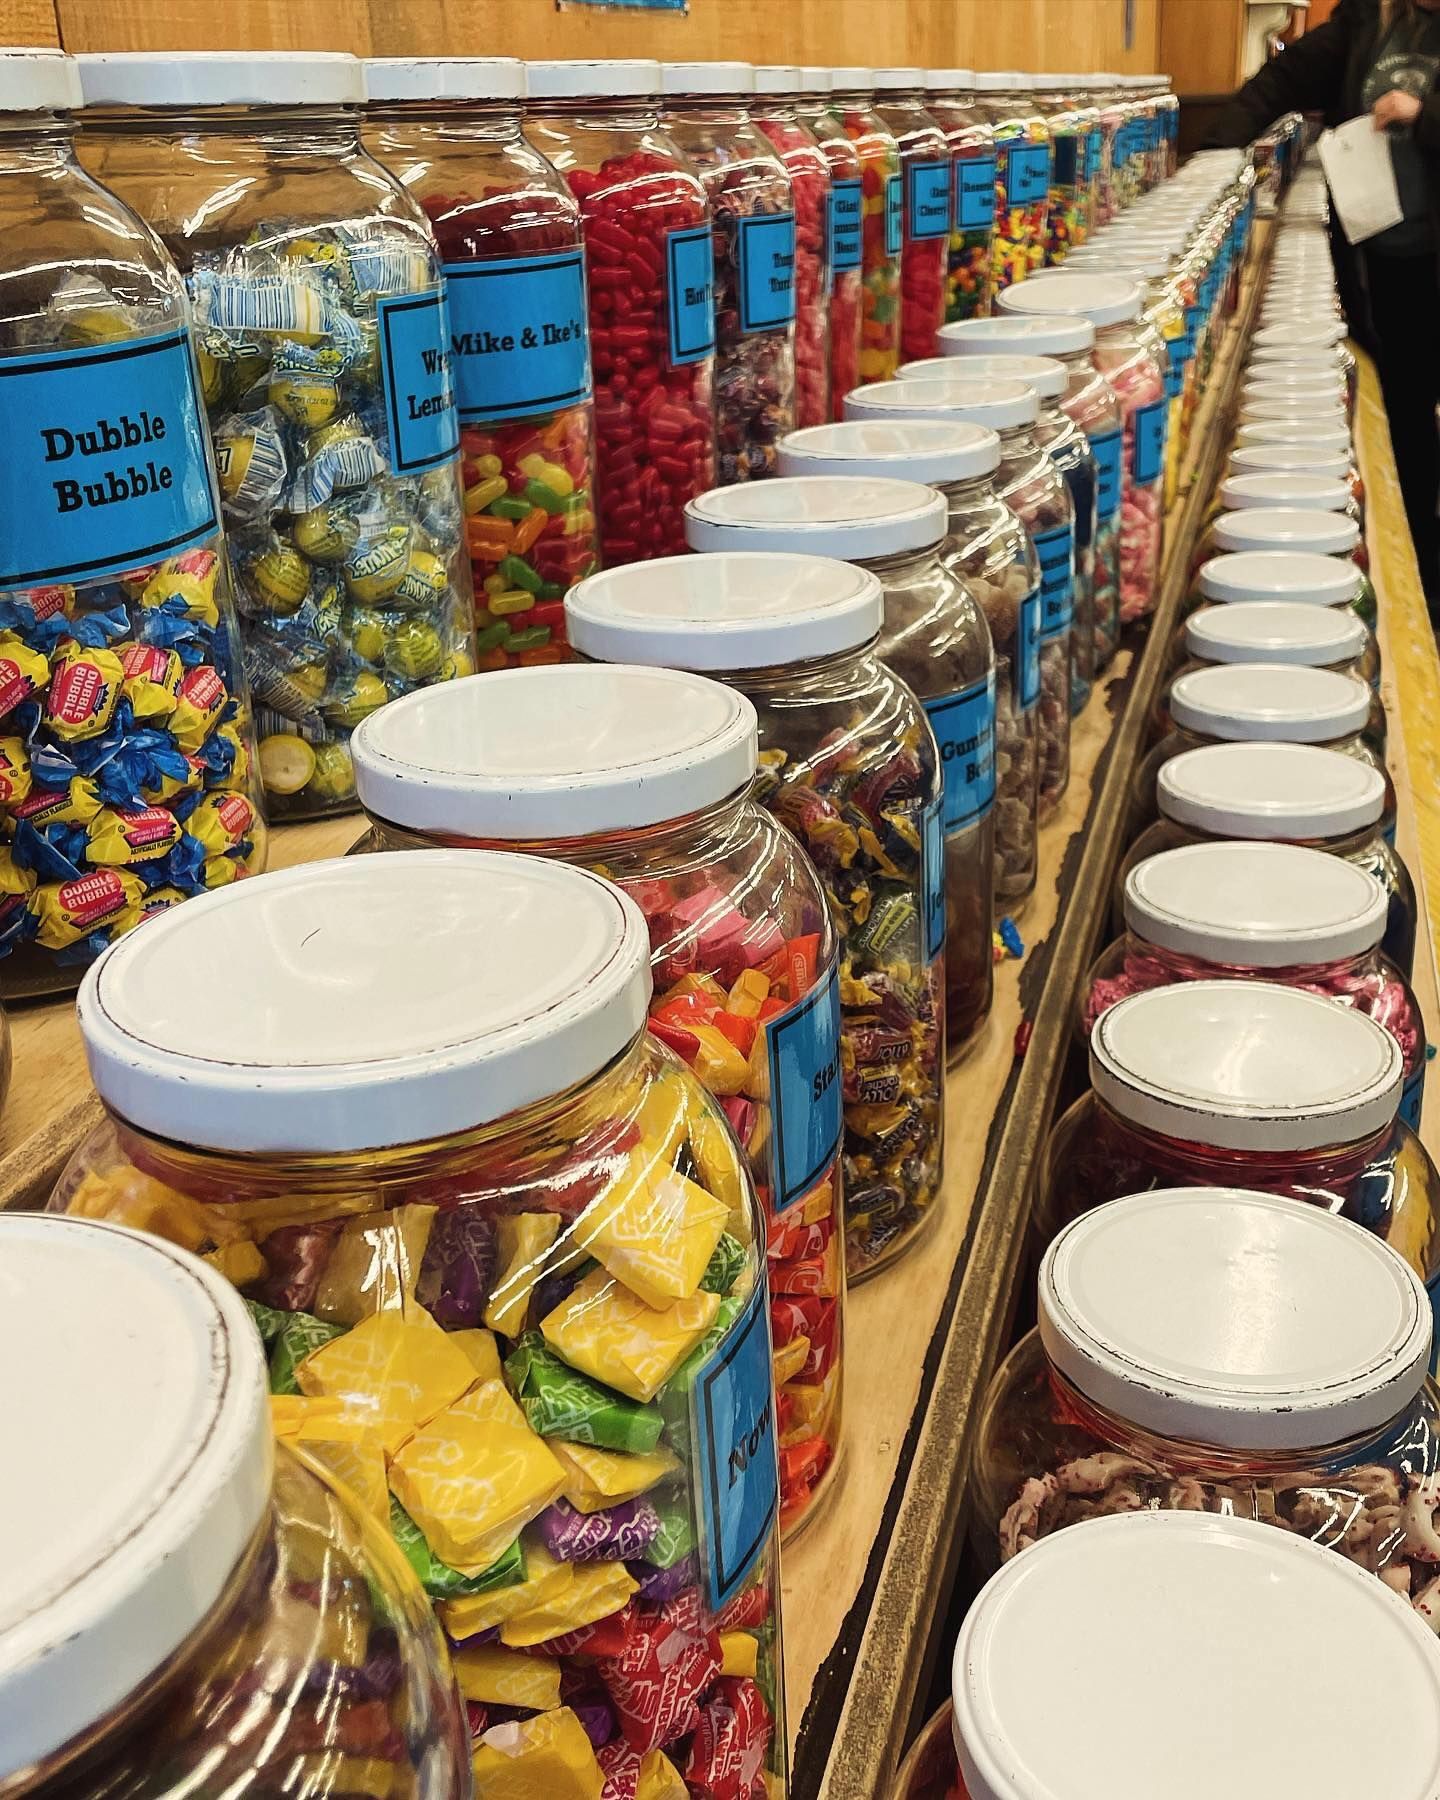 World's Longest Candy Counter, world record in Littleton, New Hampshire